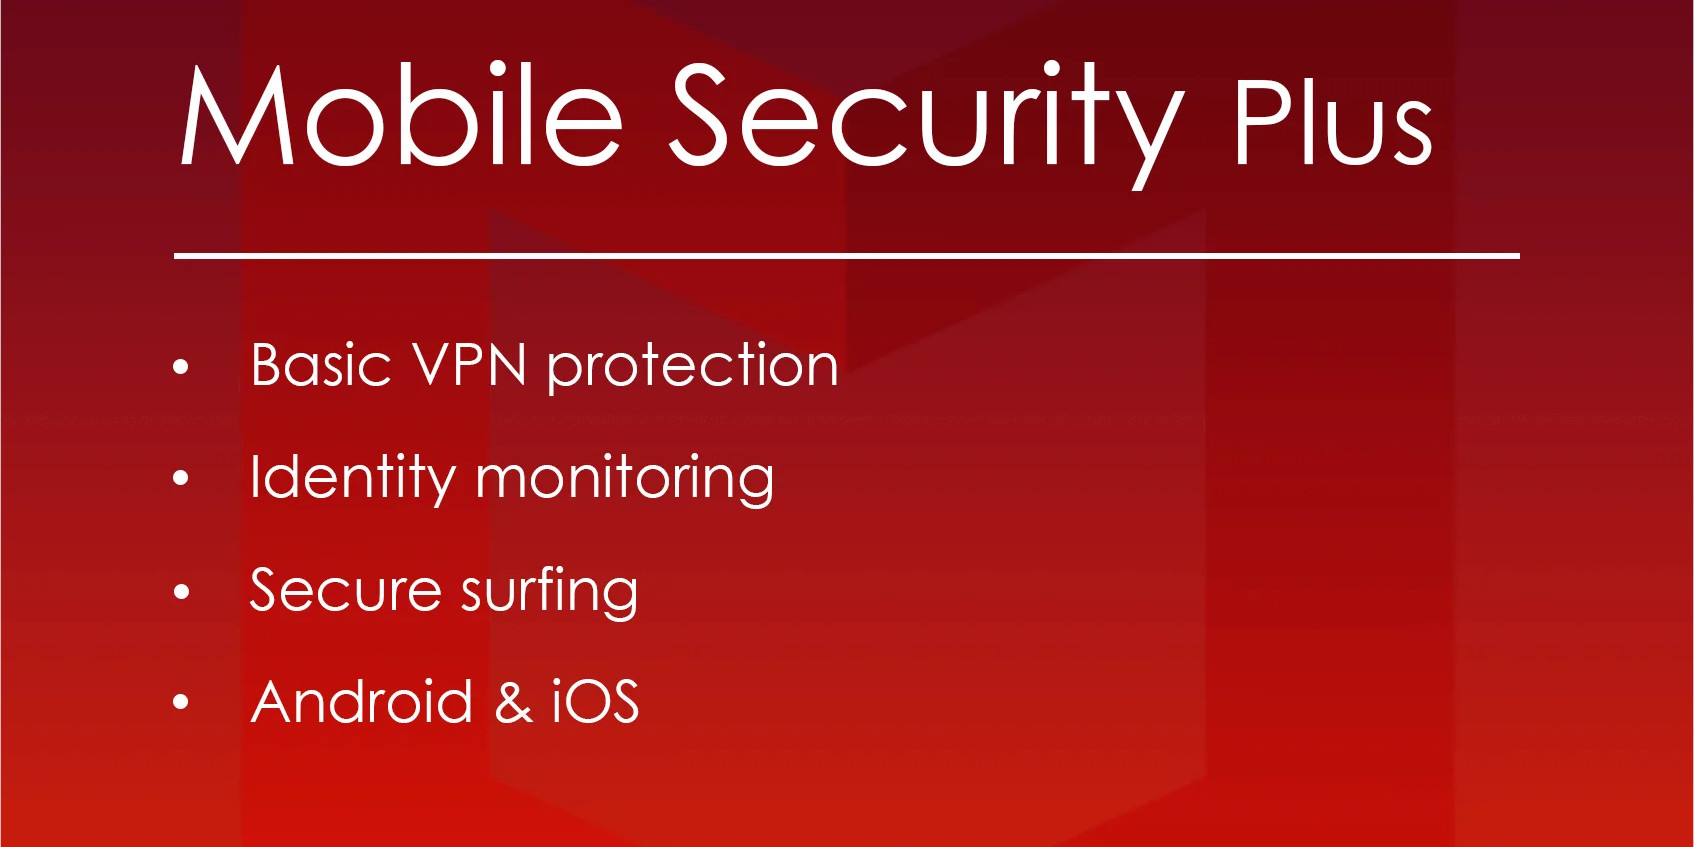 McAfee Mobile Security Plus VPN Key (1 Year / Unlimited Devices) 6.75 usd